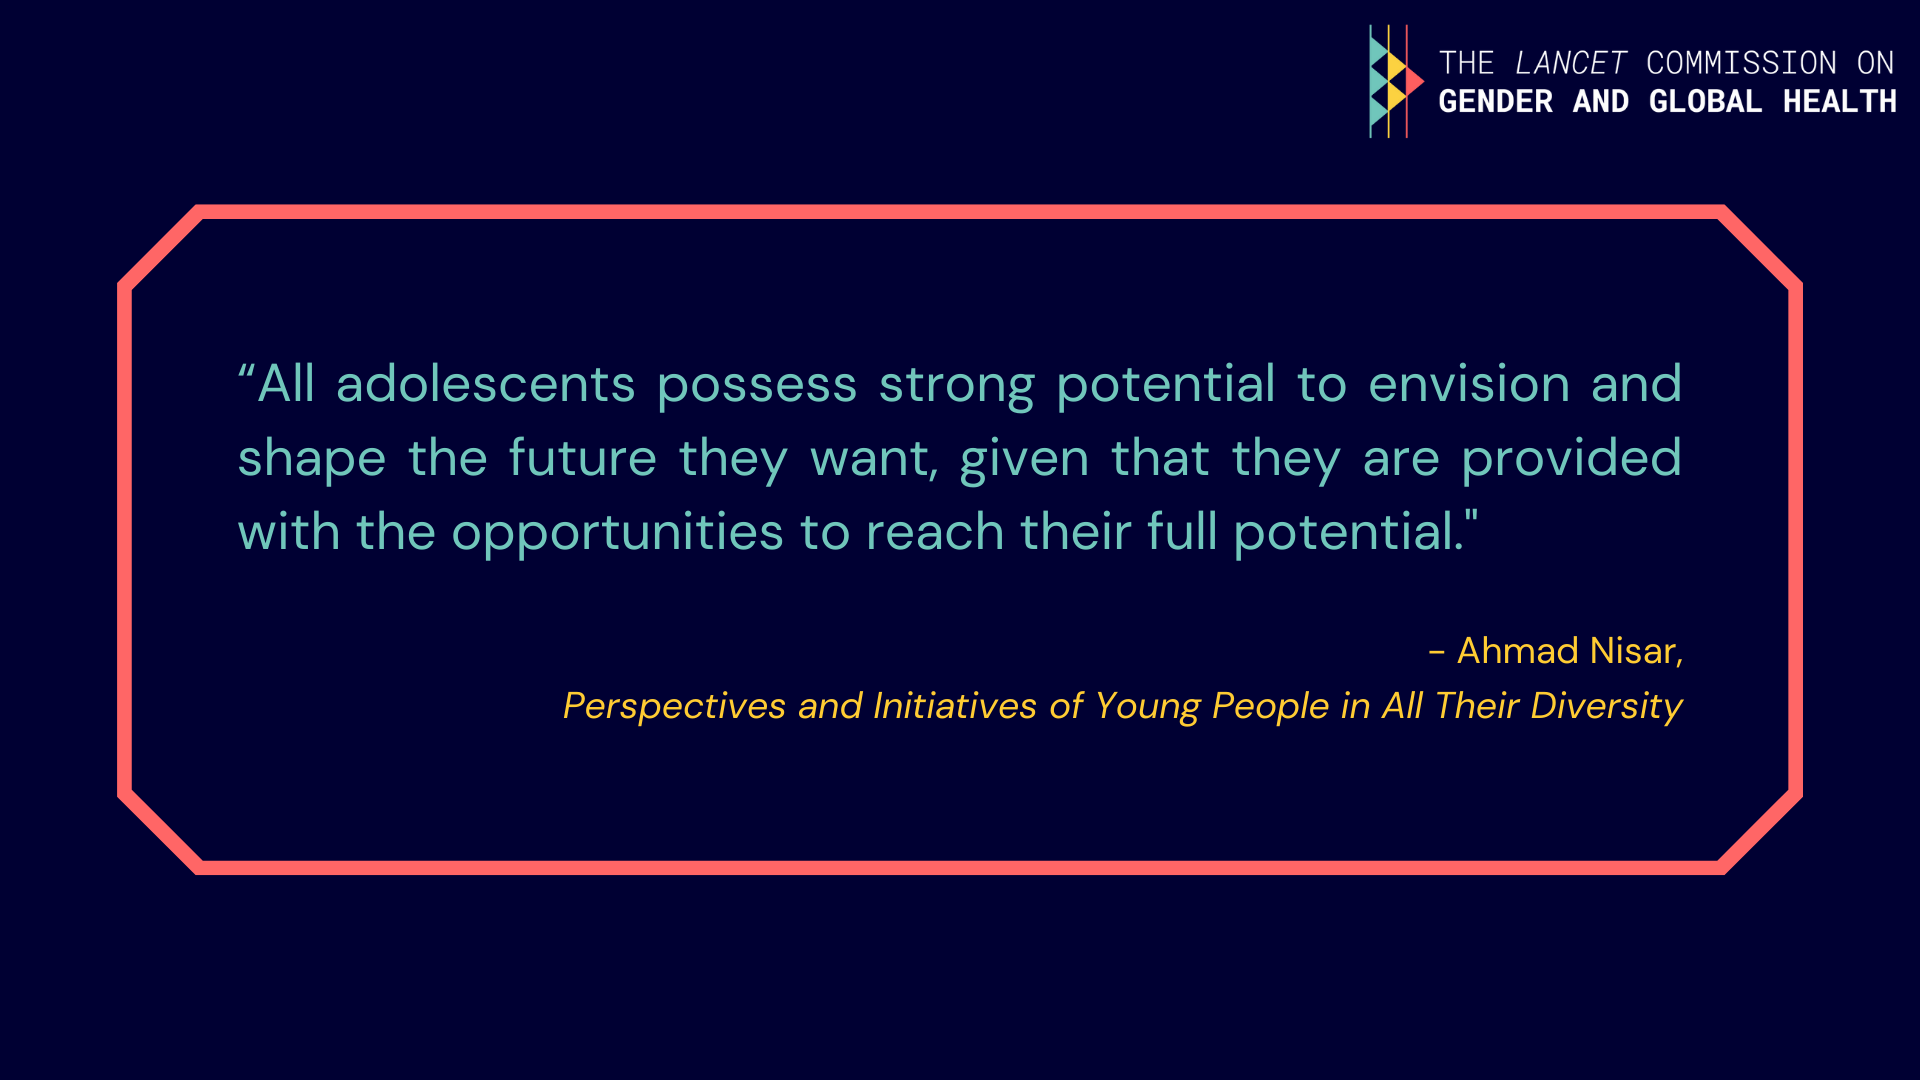 Quote from Ahmad Nisar: "All adolescents possess strong potential to envision and shape the future they want, given that they are provided with the opportunities to reach their full potential".